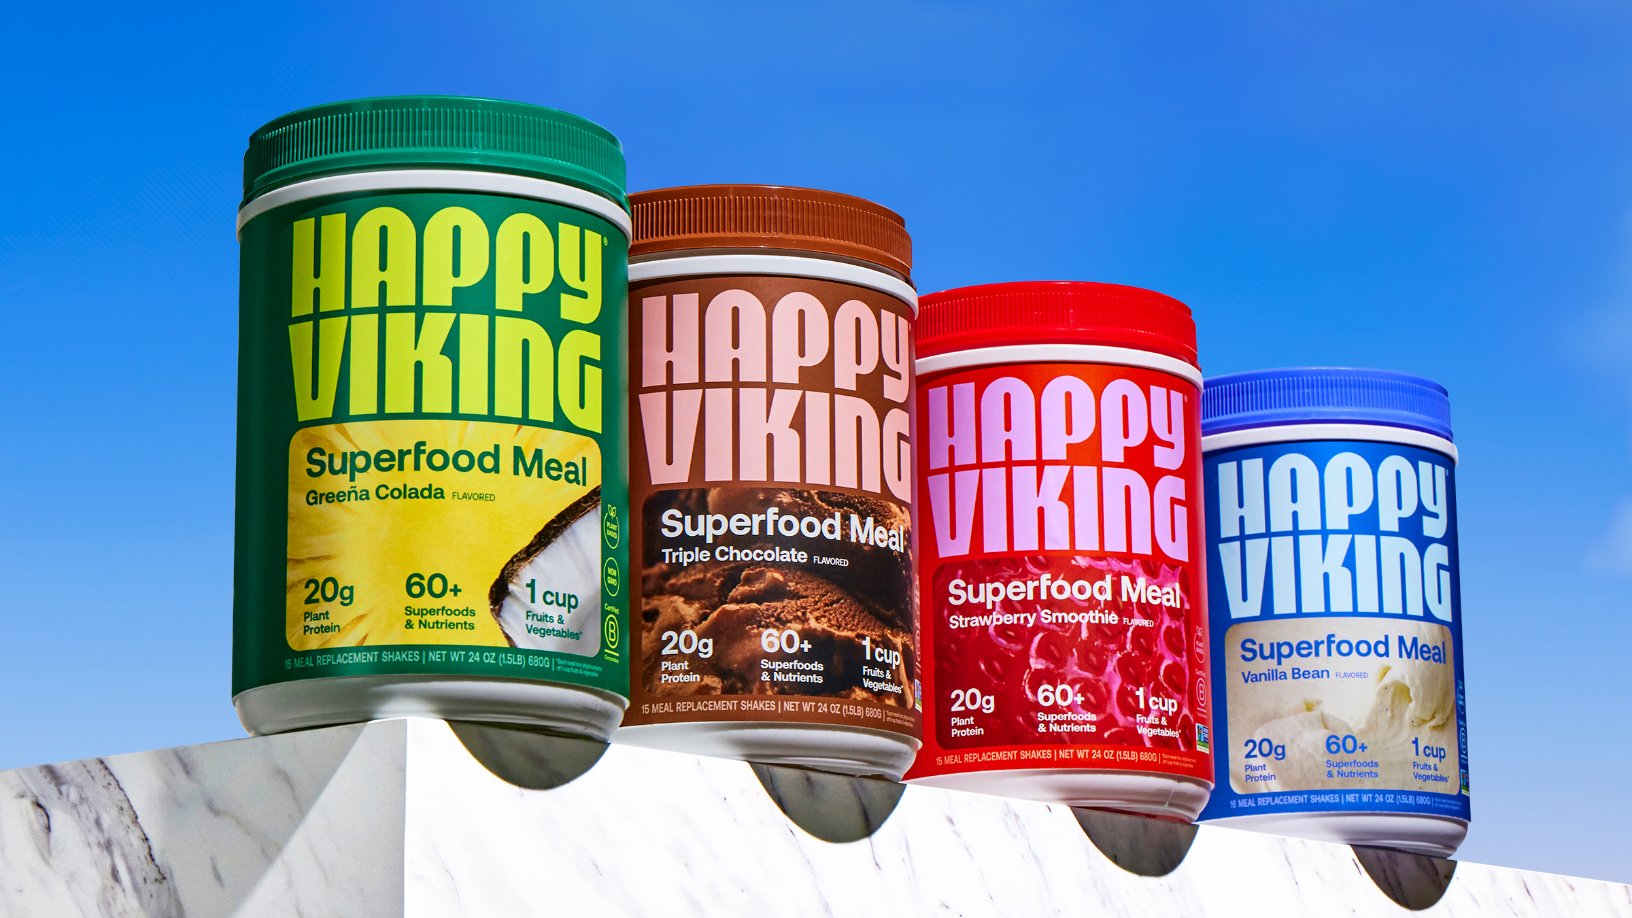 Venus Williams’ Happy Viking Mixes Buoyant Style and Color Into Protein Shakes